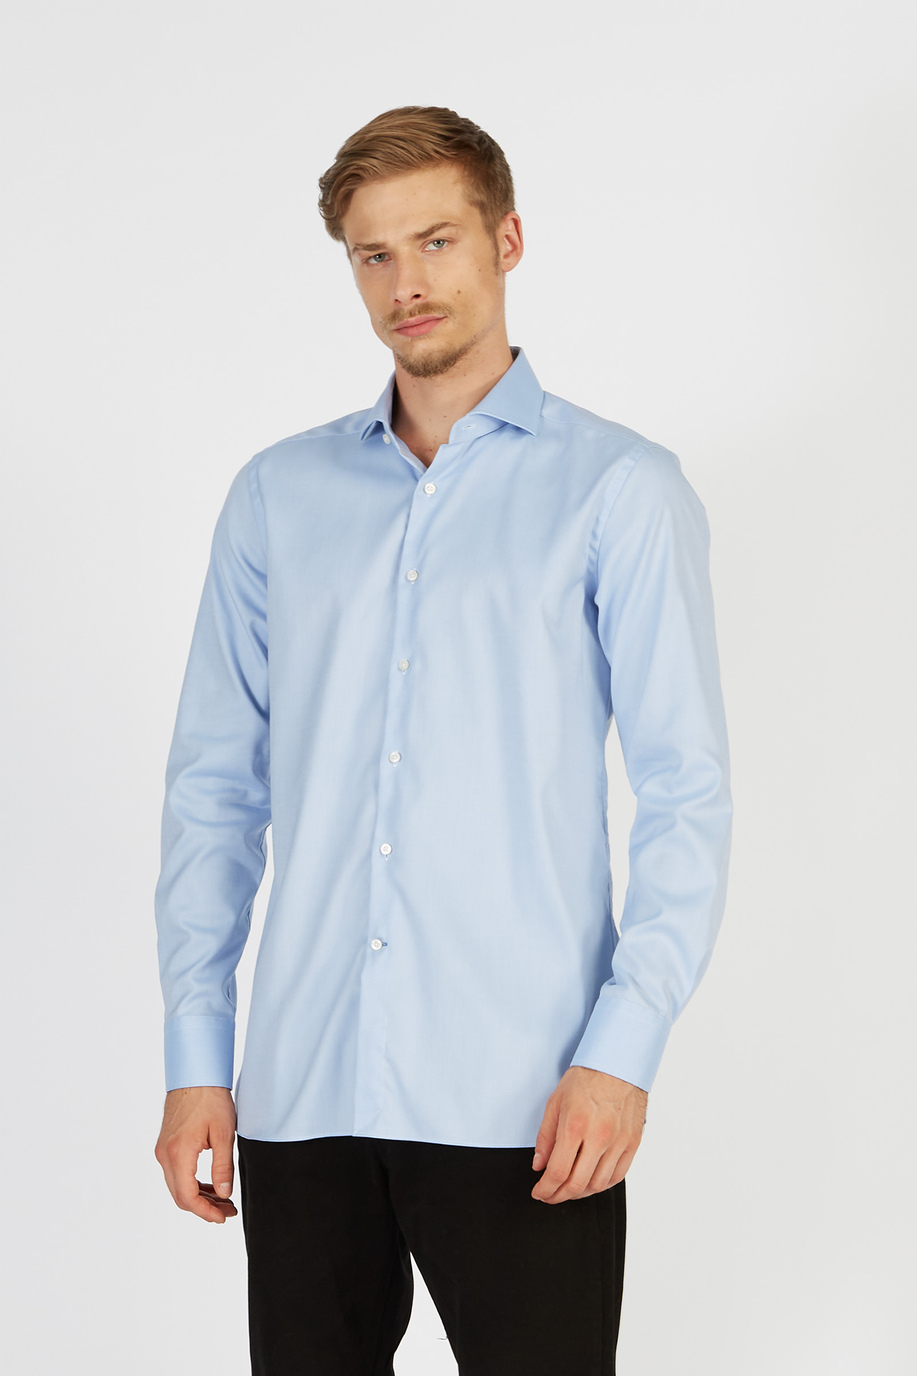 Classic style shirt for men in long-sleeved cotton - Paternò - test 2 | La Martina - Official Online Shop